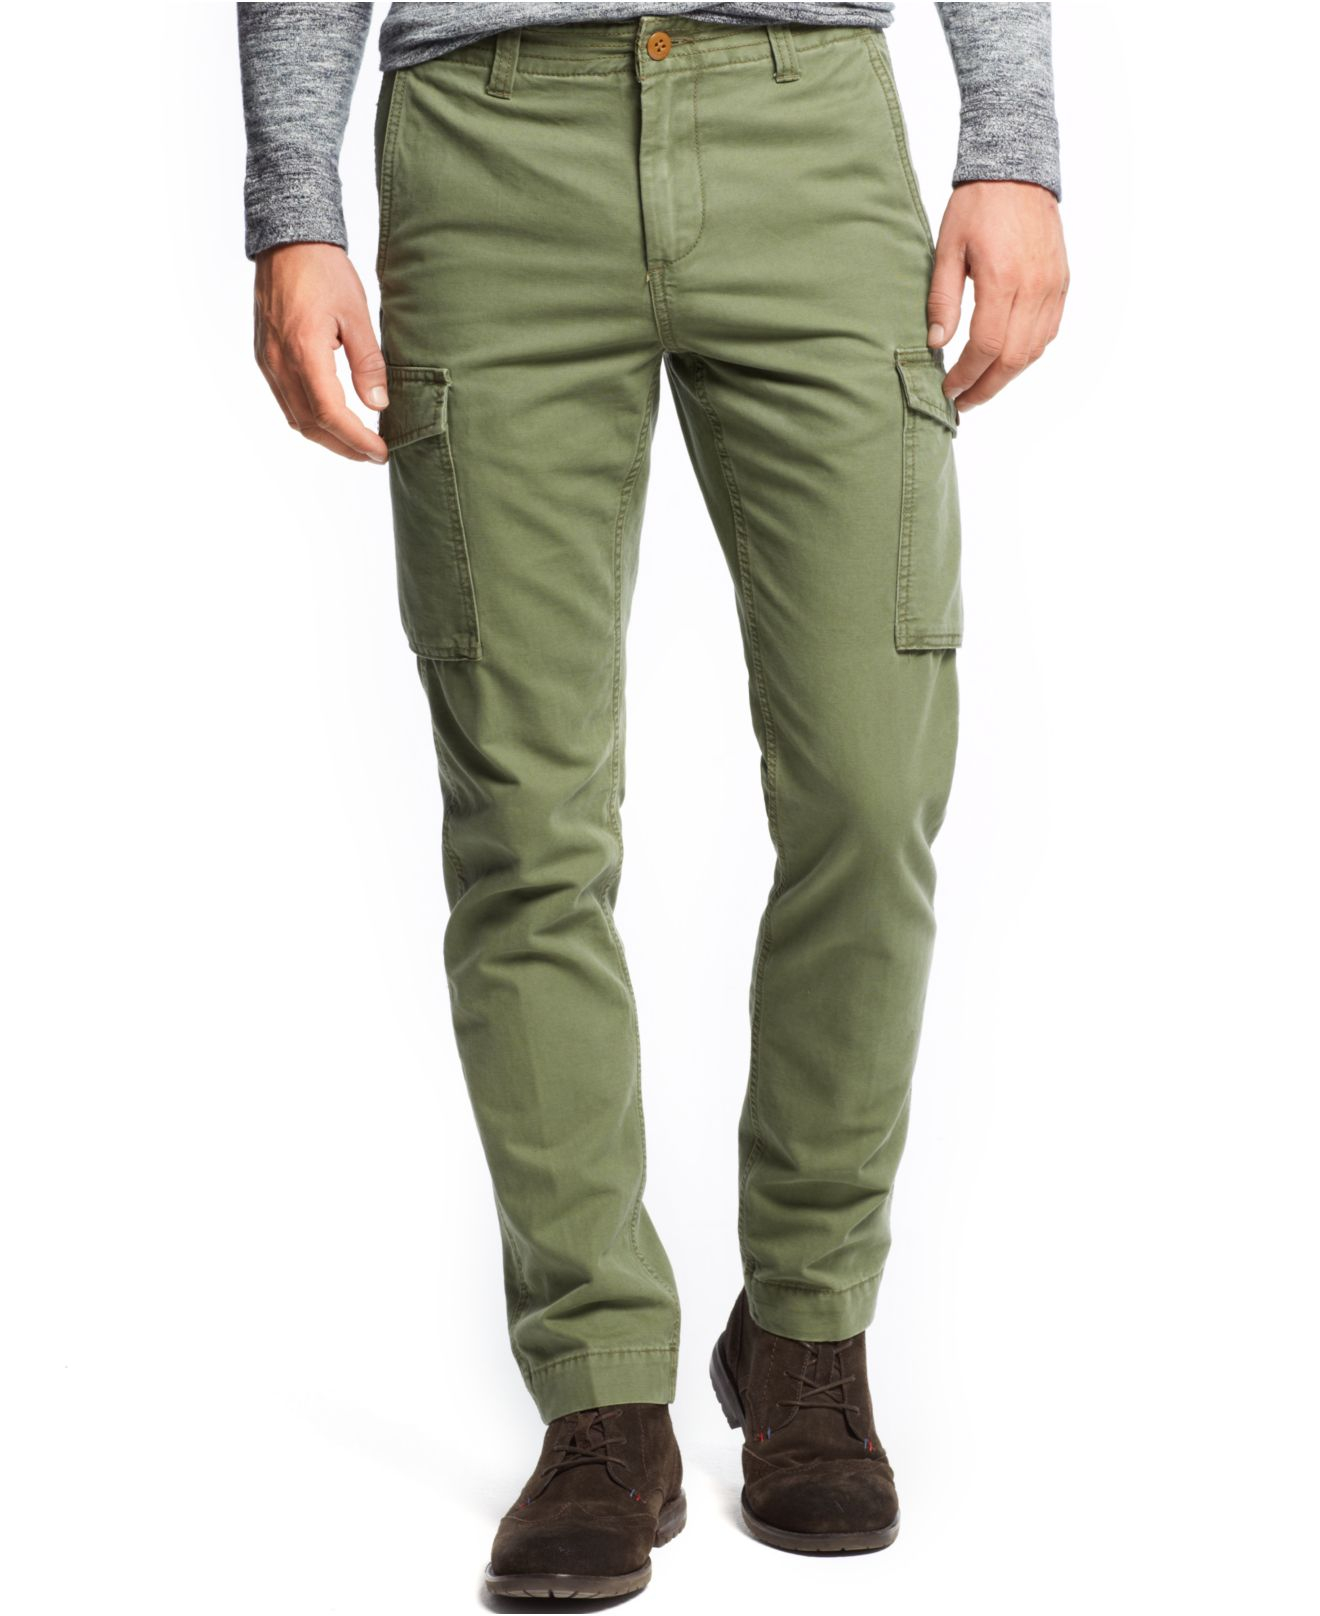 Lyst - Tommy Hilfiger Phillip Cargo Pants in Green for Men